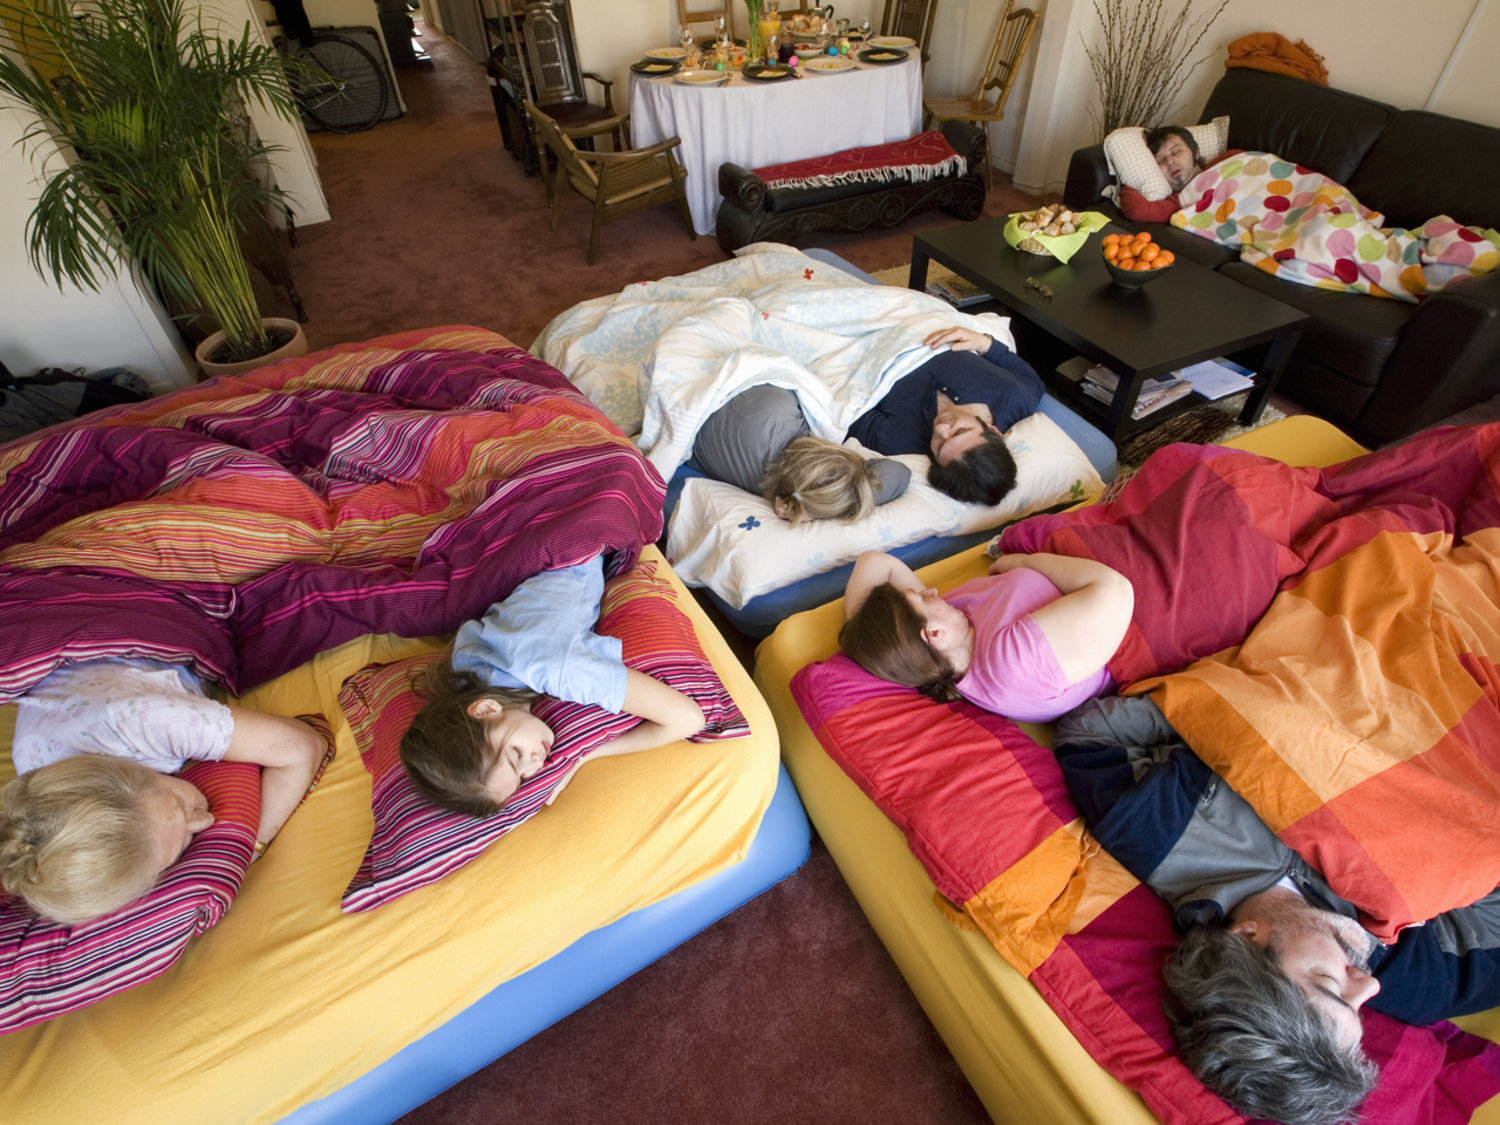 Evict The Kids From Their Beds For Holiday Guests Parents Debate